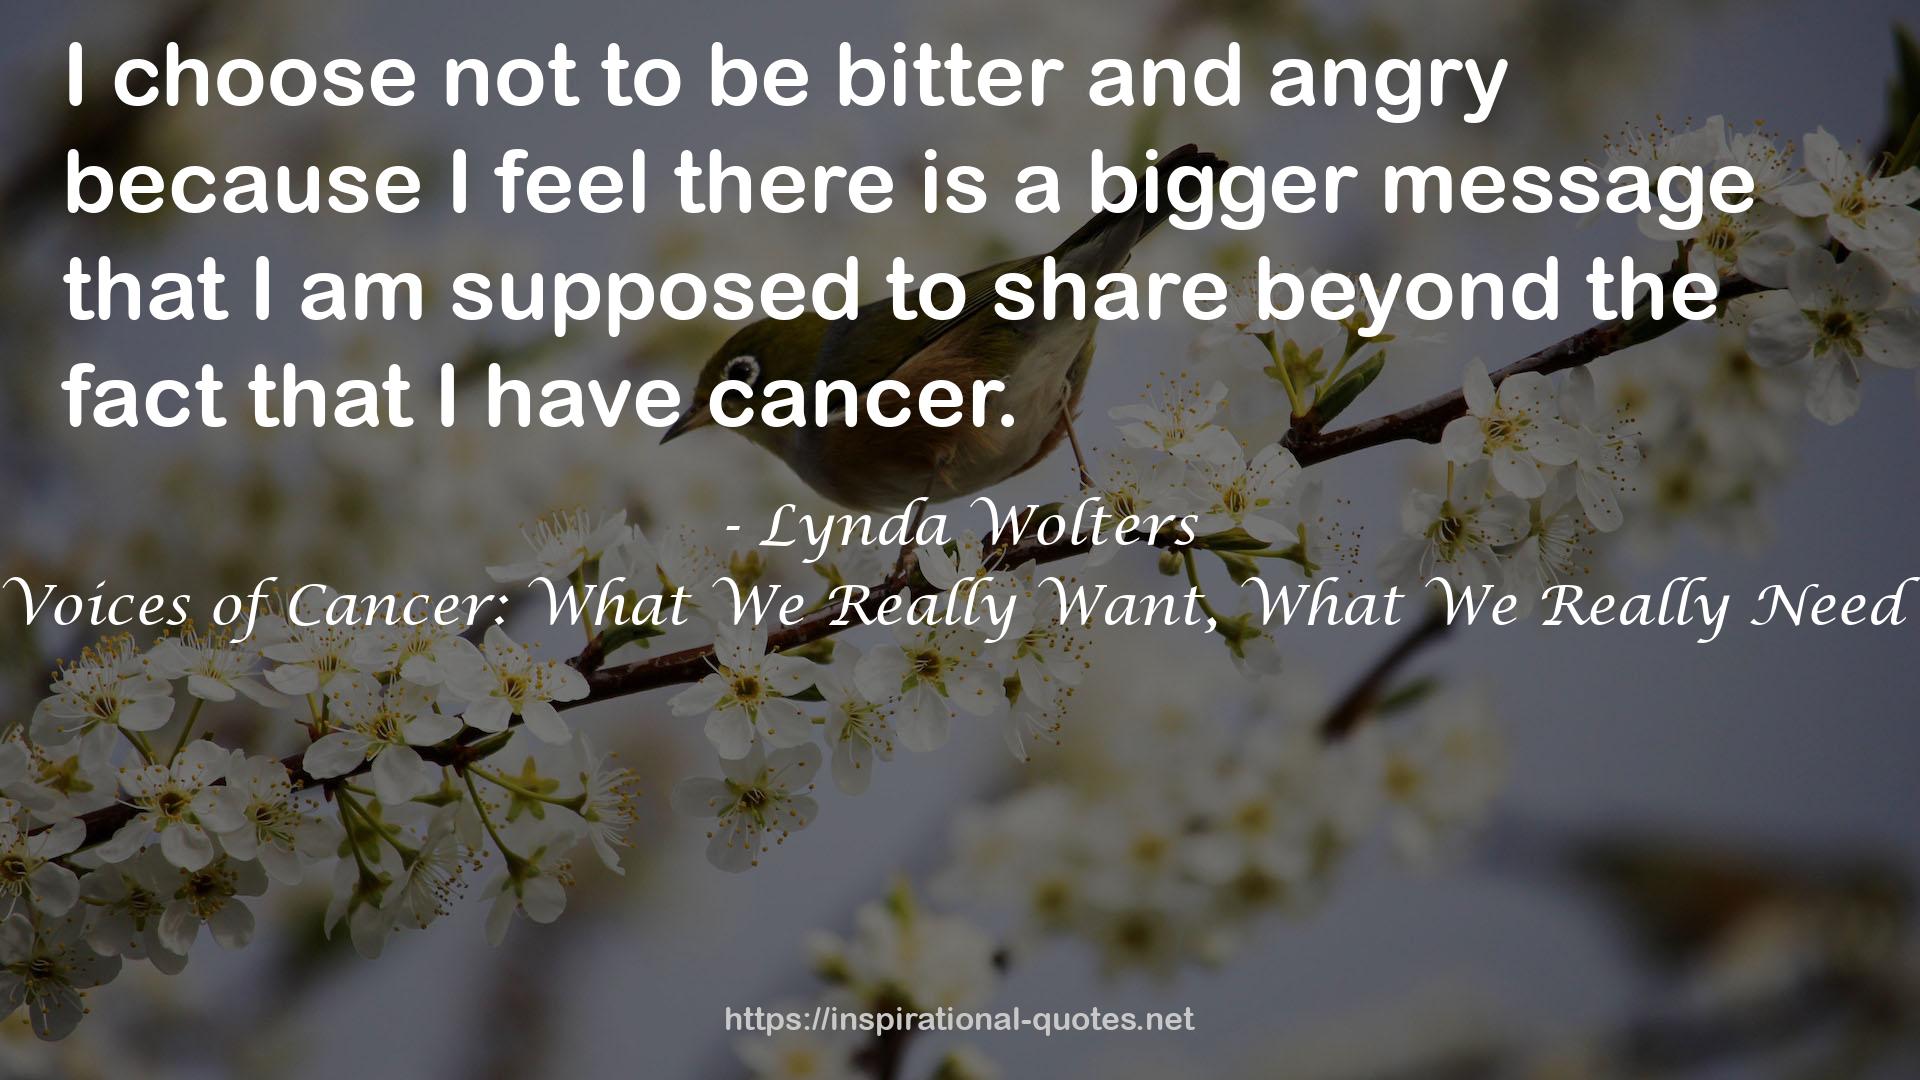 Voices of Cancer: What We Really Want, What We Really Need QUOTES